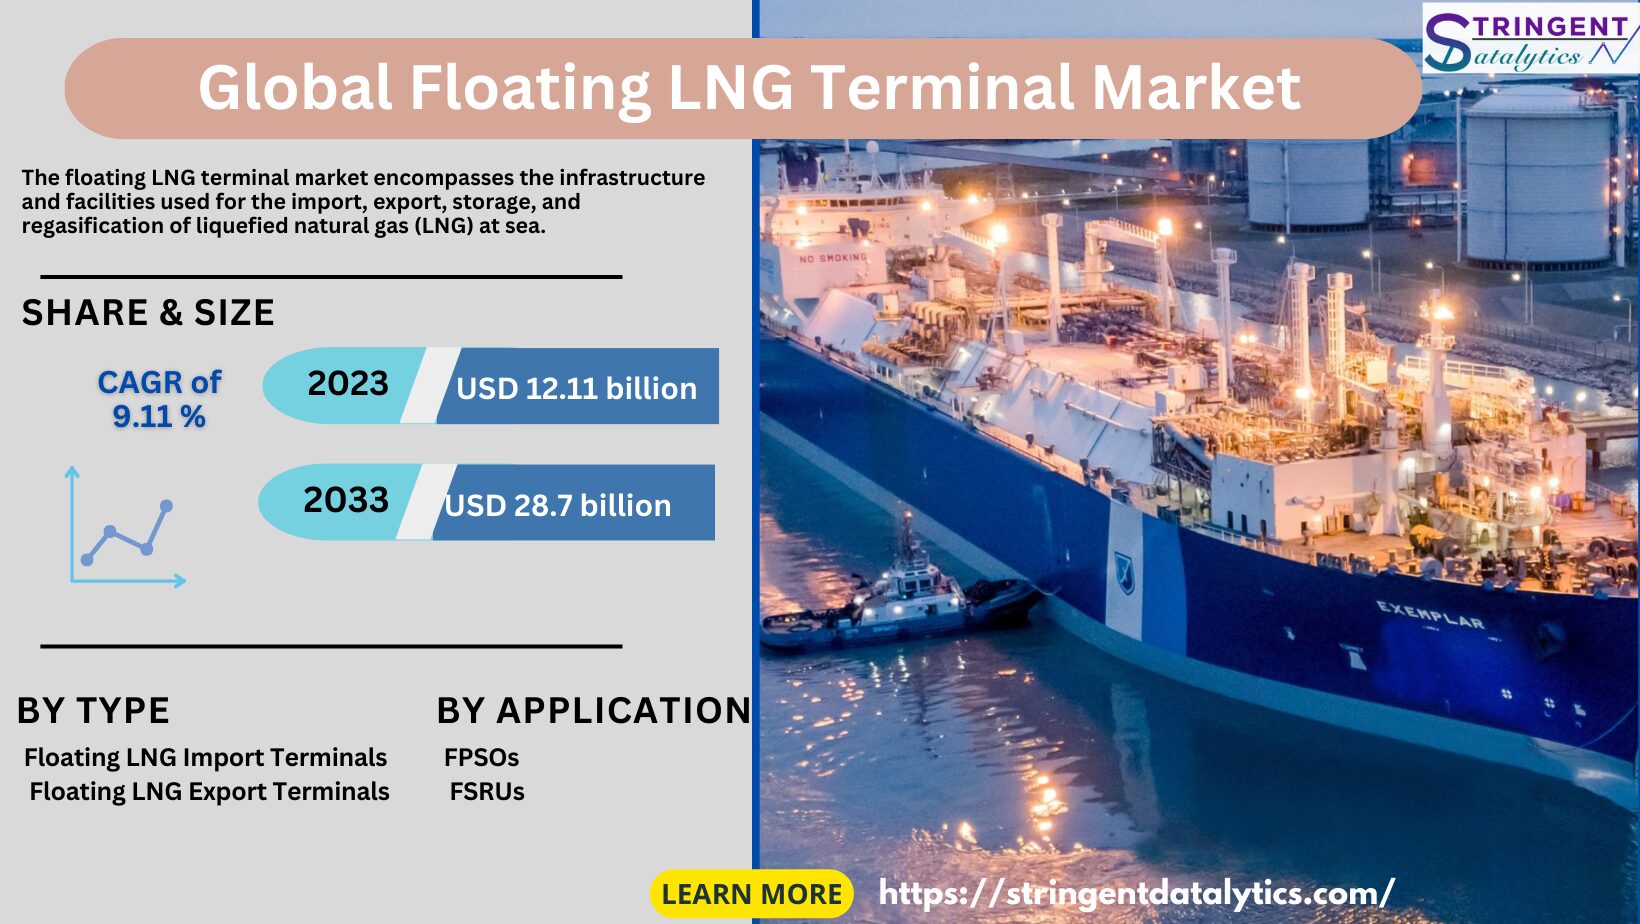 Floating LNG Terminal Market Overview Analysis, Trends, Share, Size, Type & Future Forecast to 2033